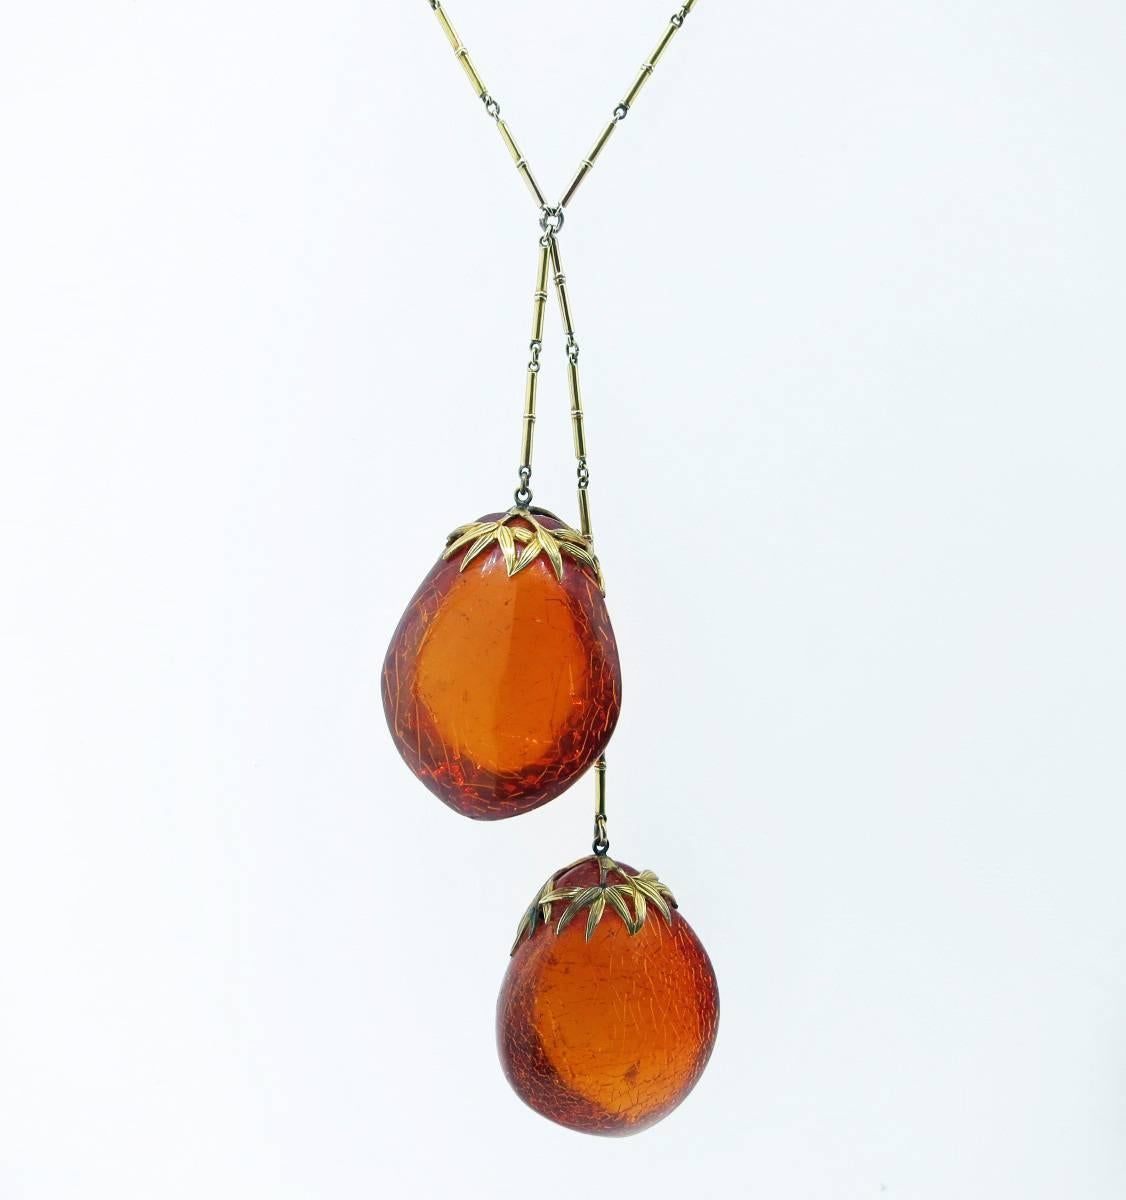 Great 14kt. link necklace with bamboo motif capped natural  amber drops. Light in weight but with lots of visual impact . The necklace drops to approx 20 inches. Circa 1900.